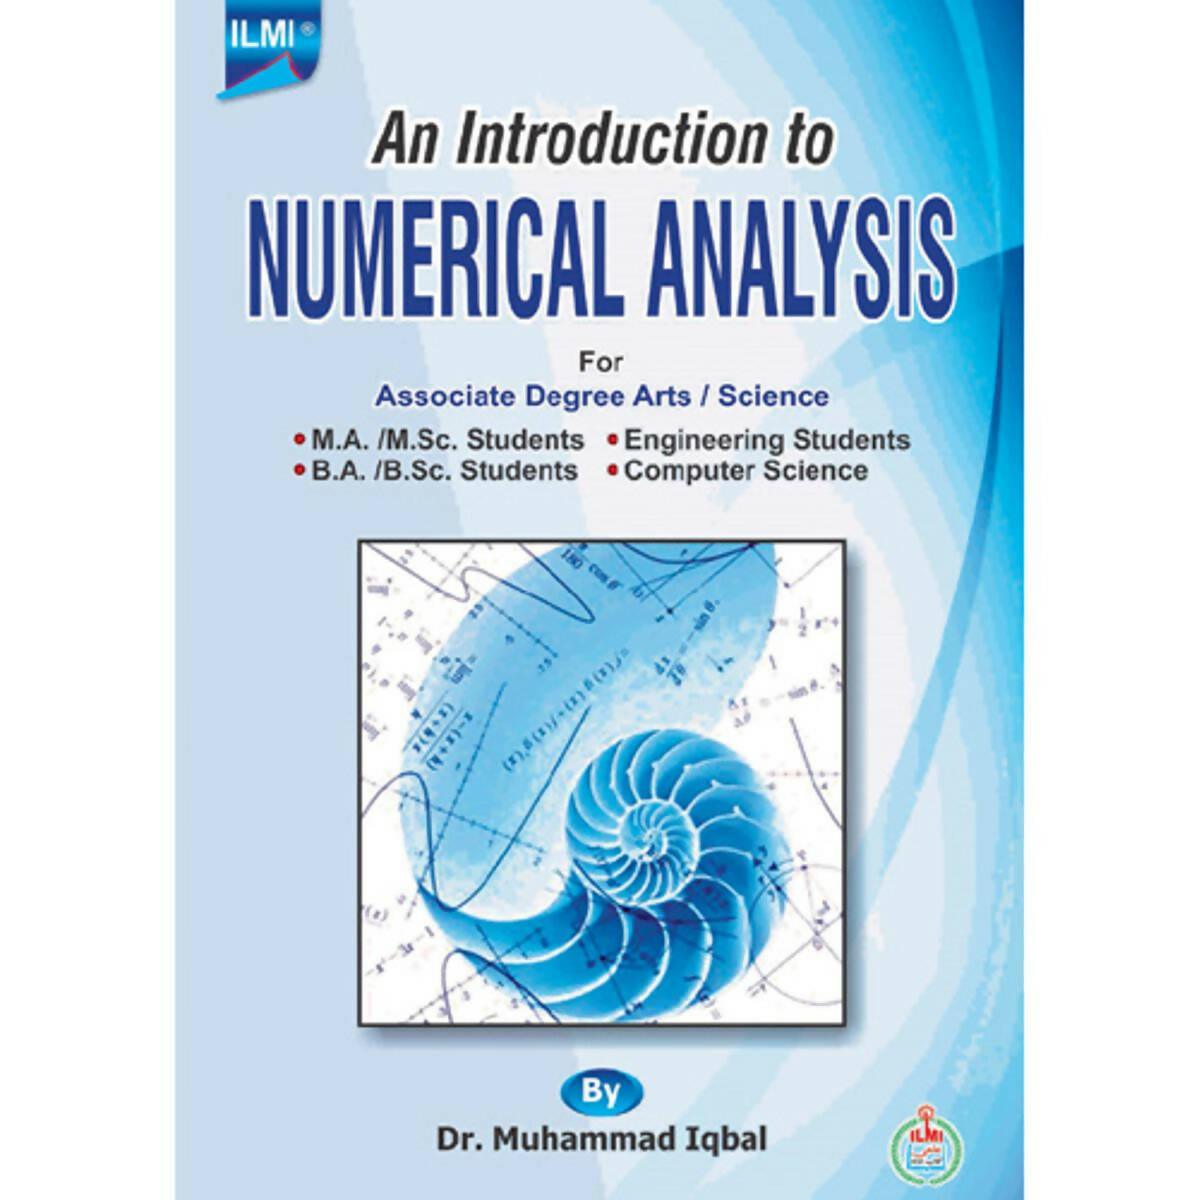 ilmi An Introduction to Numerical Analysis for Associate Degree Arts / Science - ValueBox